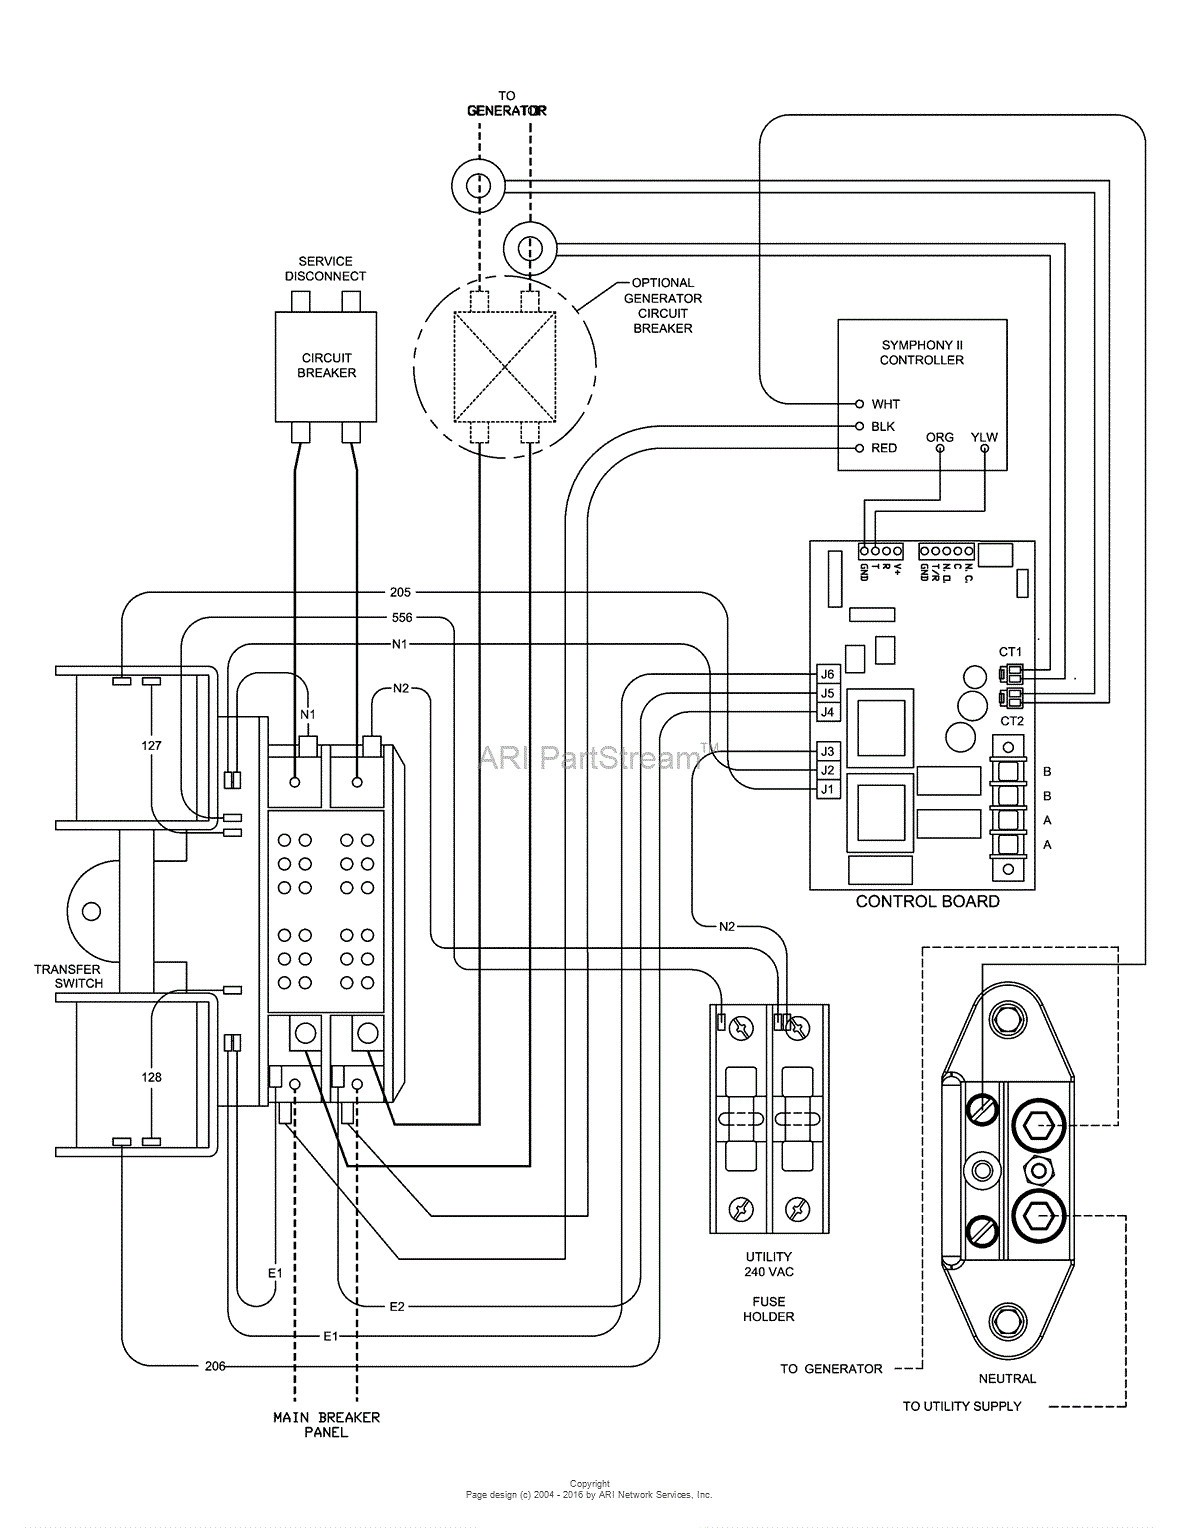 Briggs And Stratton Power Products 02 200 Amp Automatic Throughout Generac Transfer Switch Wiring Wiring Diagram For Generac Transfer